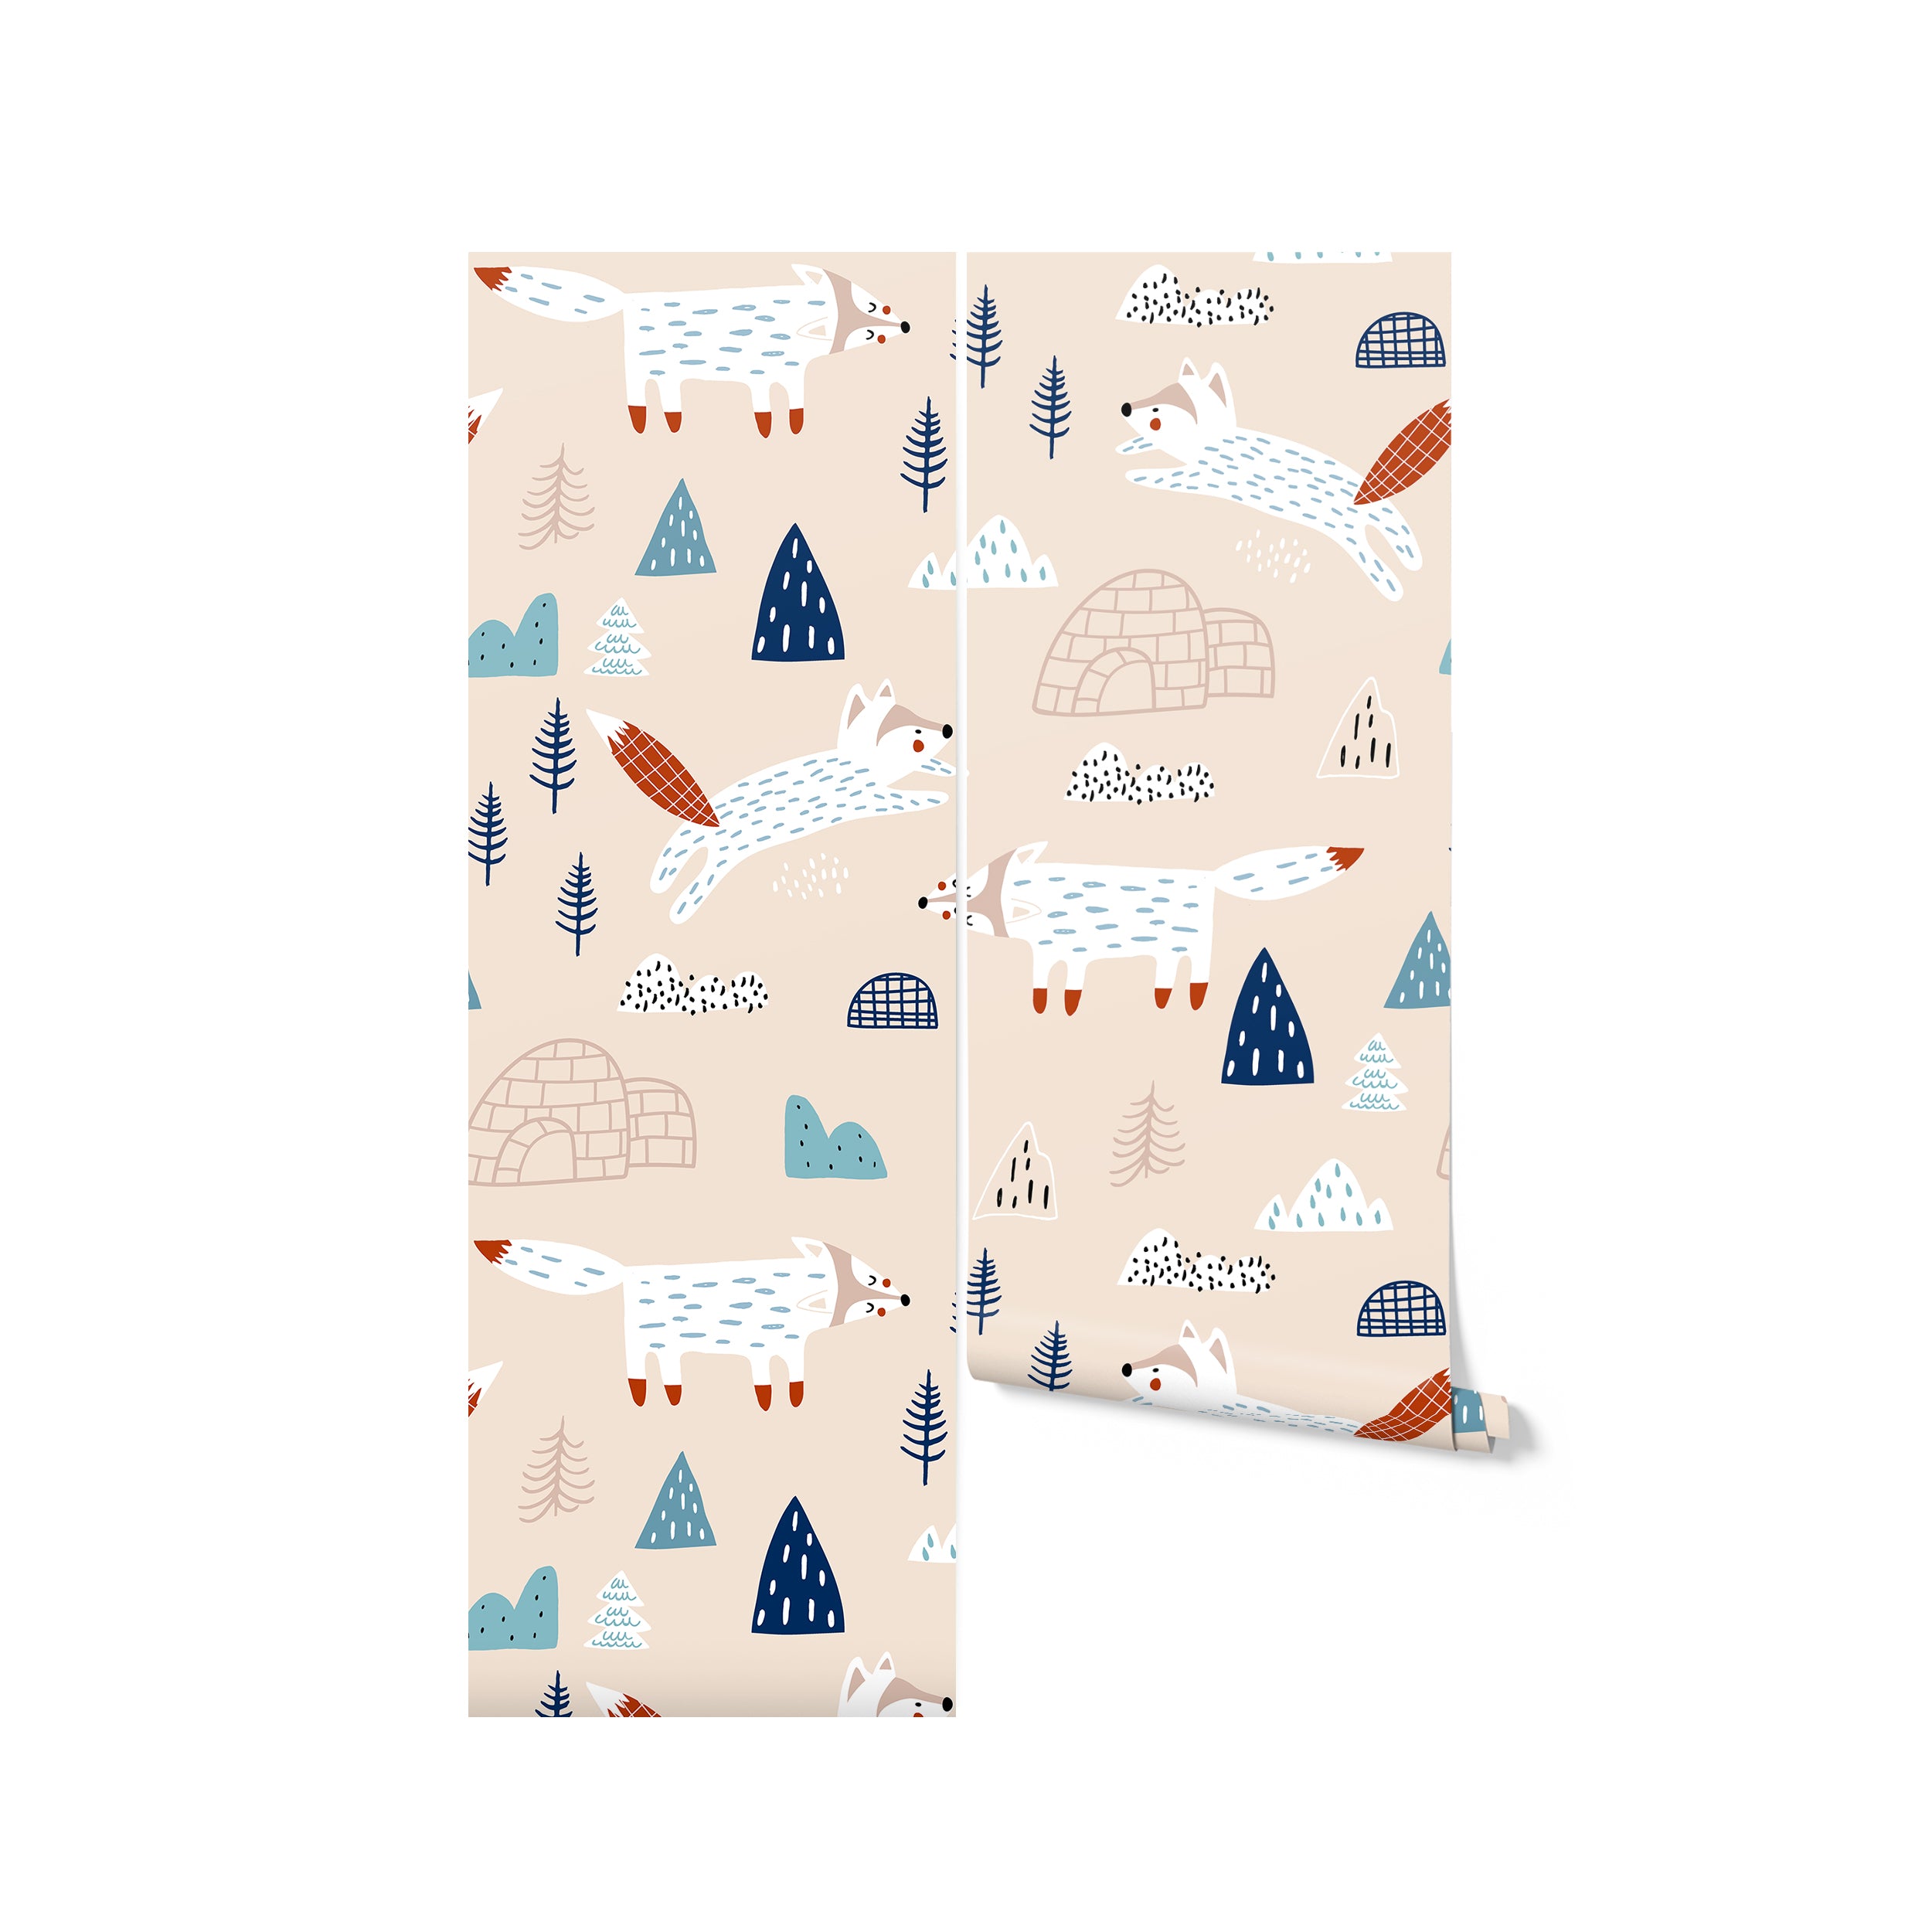 A roll of "Nordic Fox Wallpaper" displaying a delightful pattern of playful foxes, igloos, and trees on a warm beige background. The design features foxes in various poses amidst a minimalist landscape, perfect for adding a touch of whimsy to any child's room.